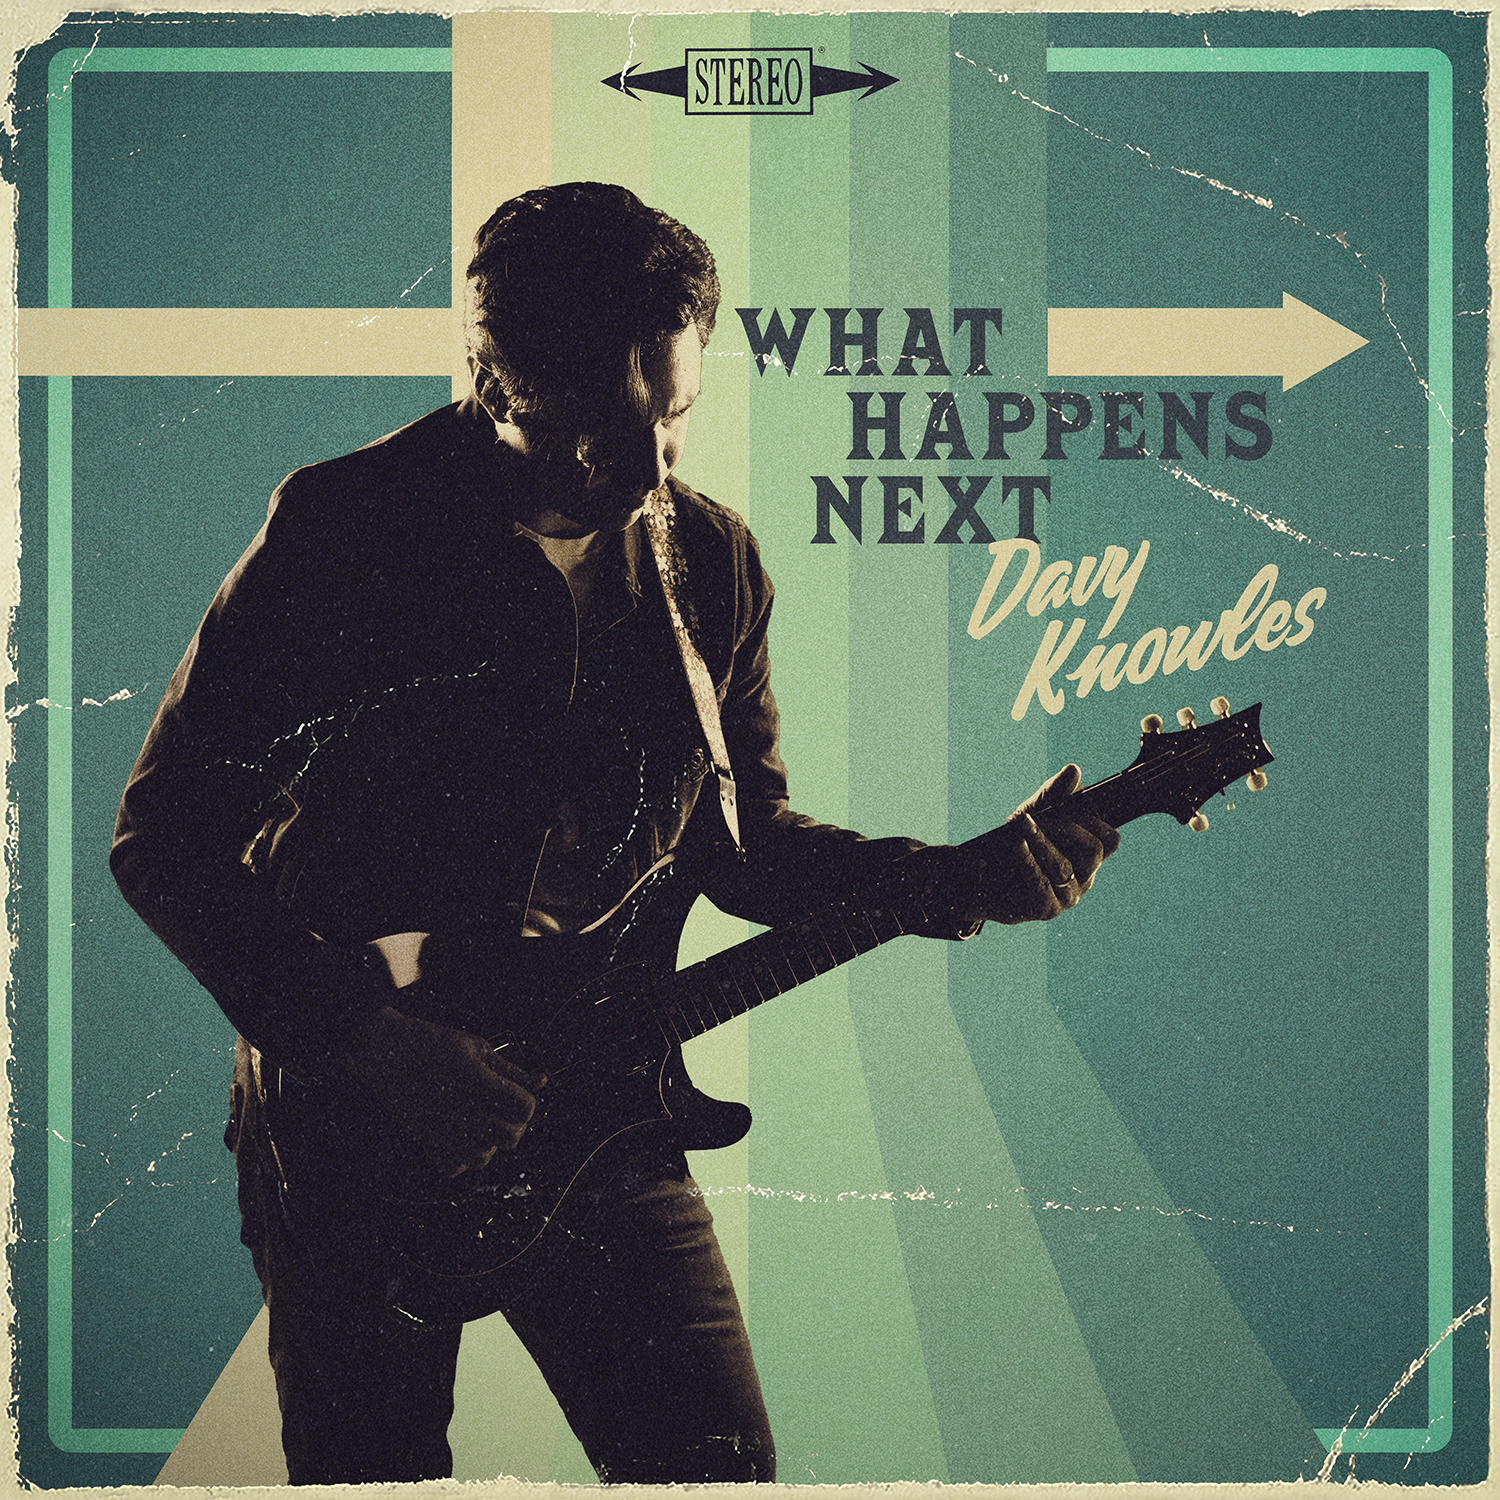 Davy Knowles (UK) – What Happens Next